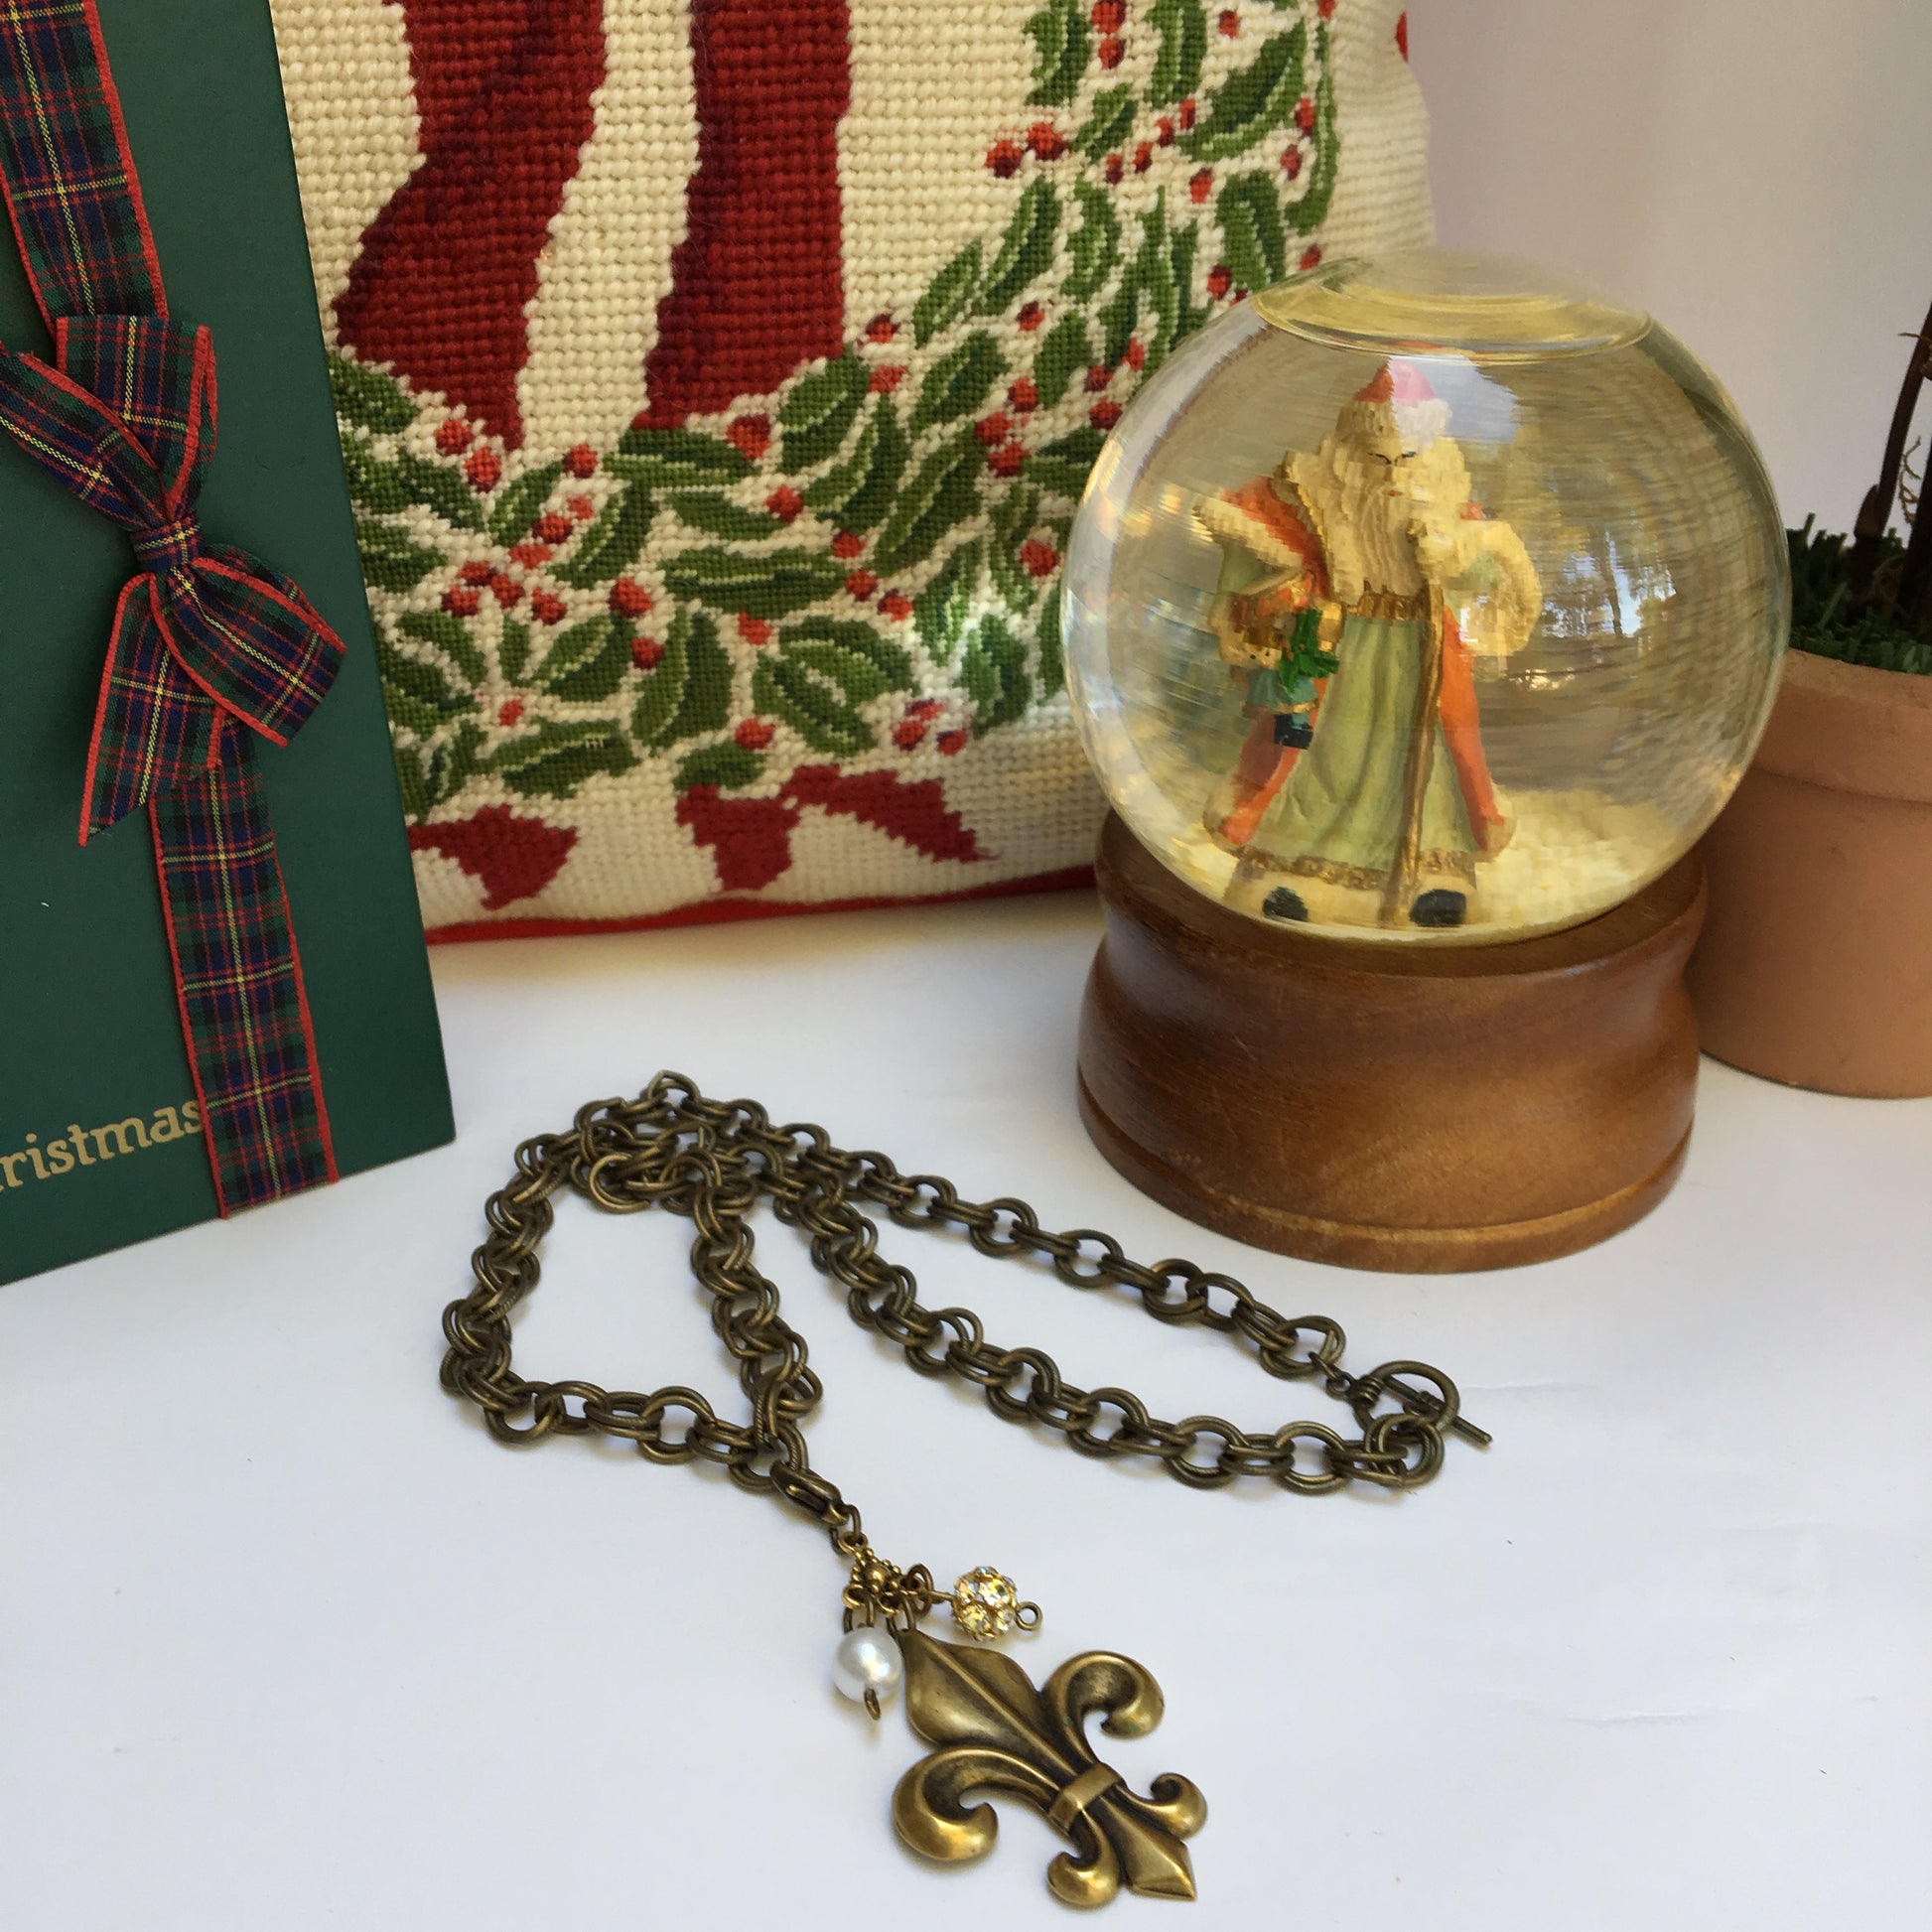 Our double link antique brass chain holds a stunning  antique gold fleur de lis embellished with crystal beads.   The necklace is 18" long and the closure is a toggle clasp.   This comes in a suede pouch for easy gift giving.  Sure to please fleur de lis lovers!   